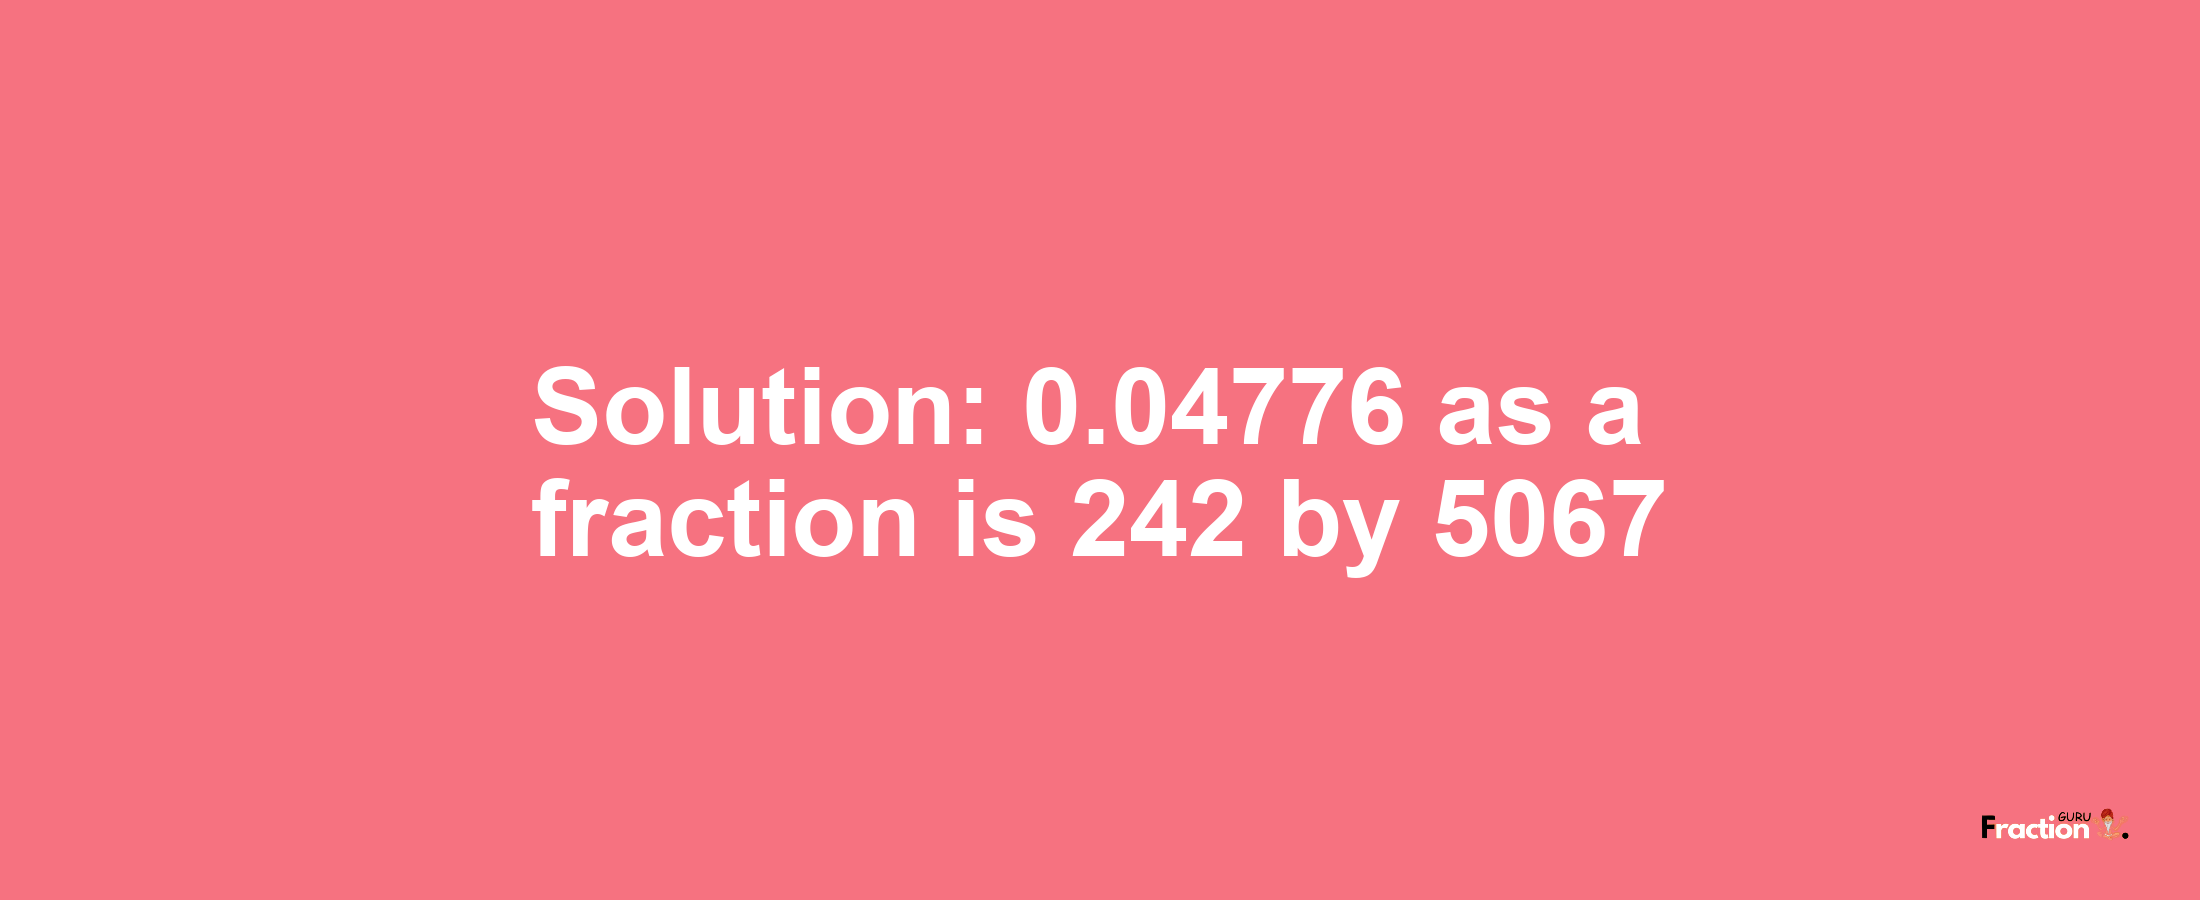 Solution:0.04776 as a fraction is 242/5067